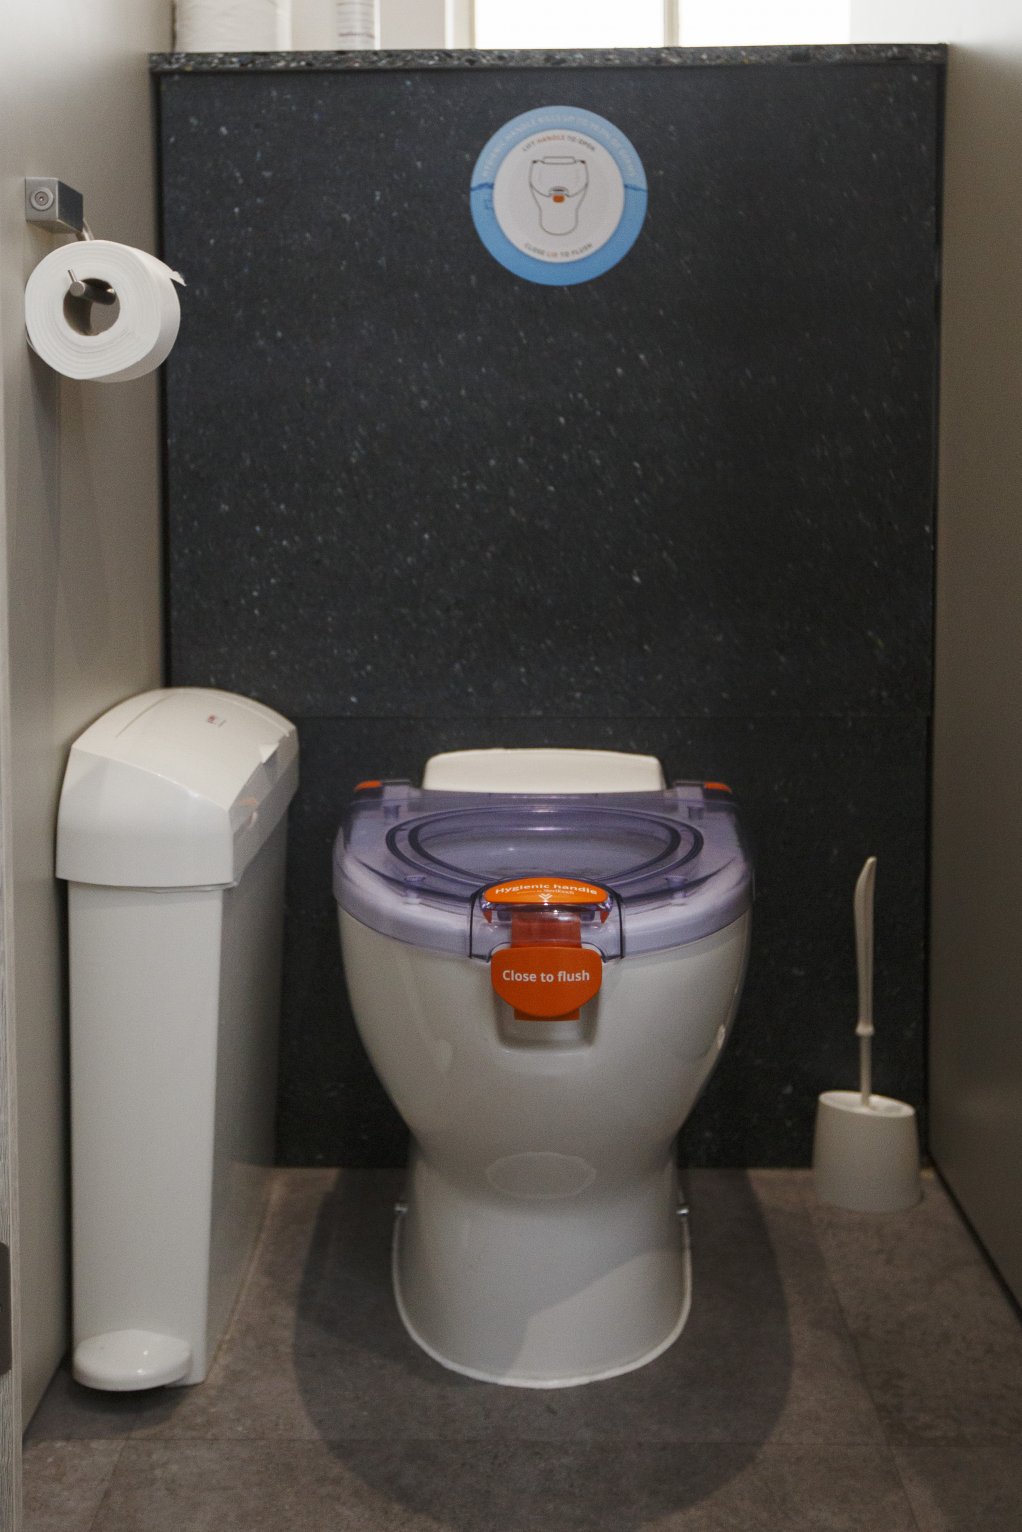 Image of a Propelair toilet